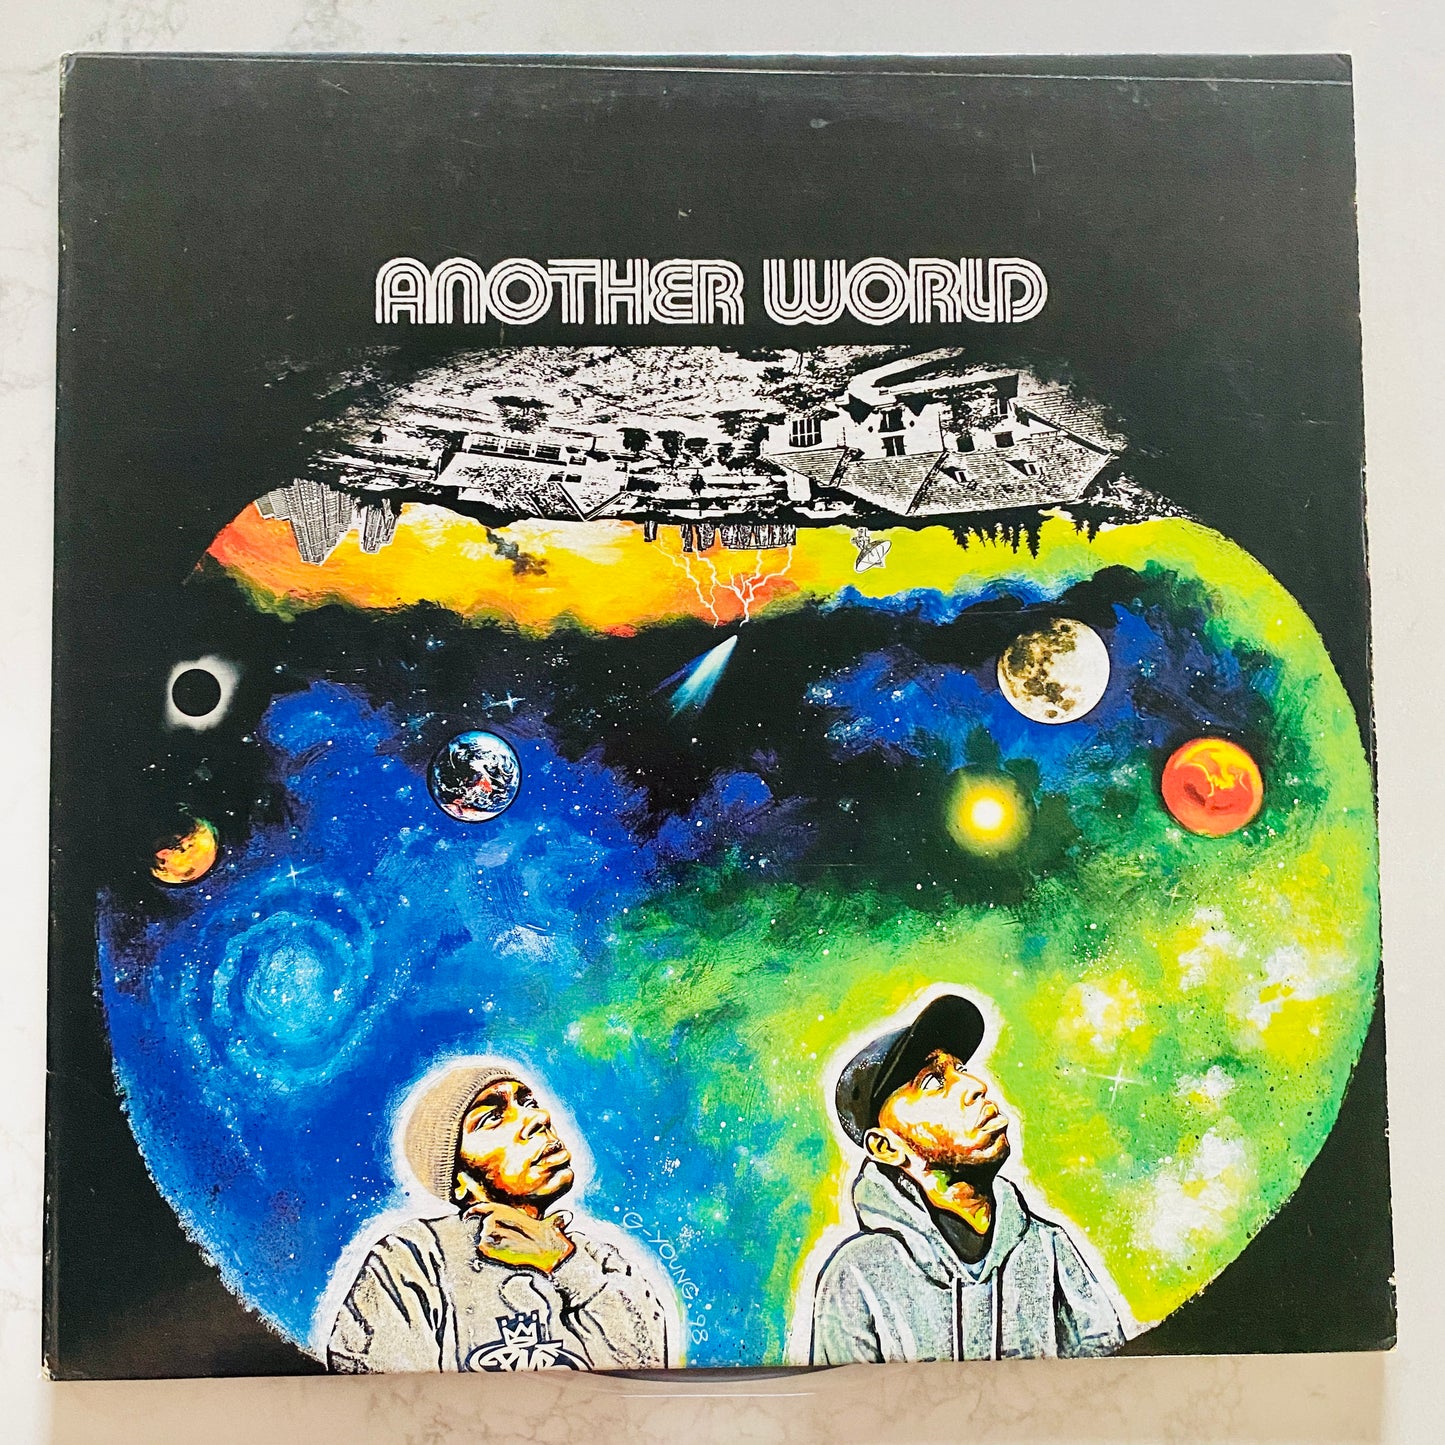 The Creators & Ambivalence Featuring Mos Def & Talib Kweli - Another World (12"). 12" HIP-HOP